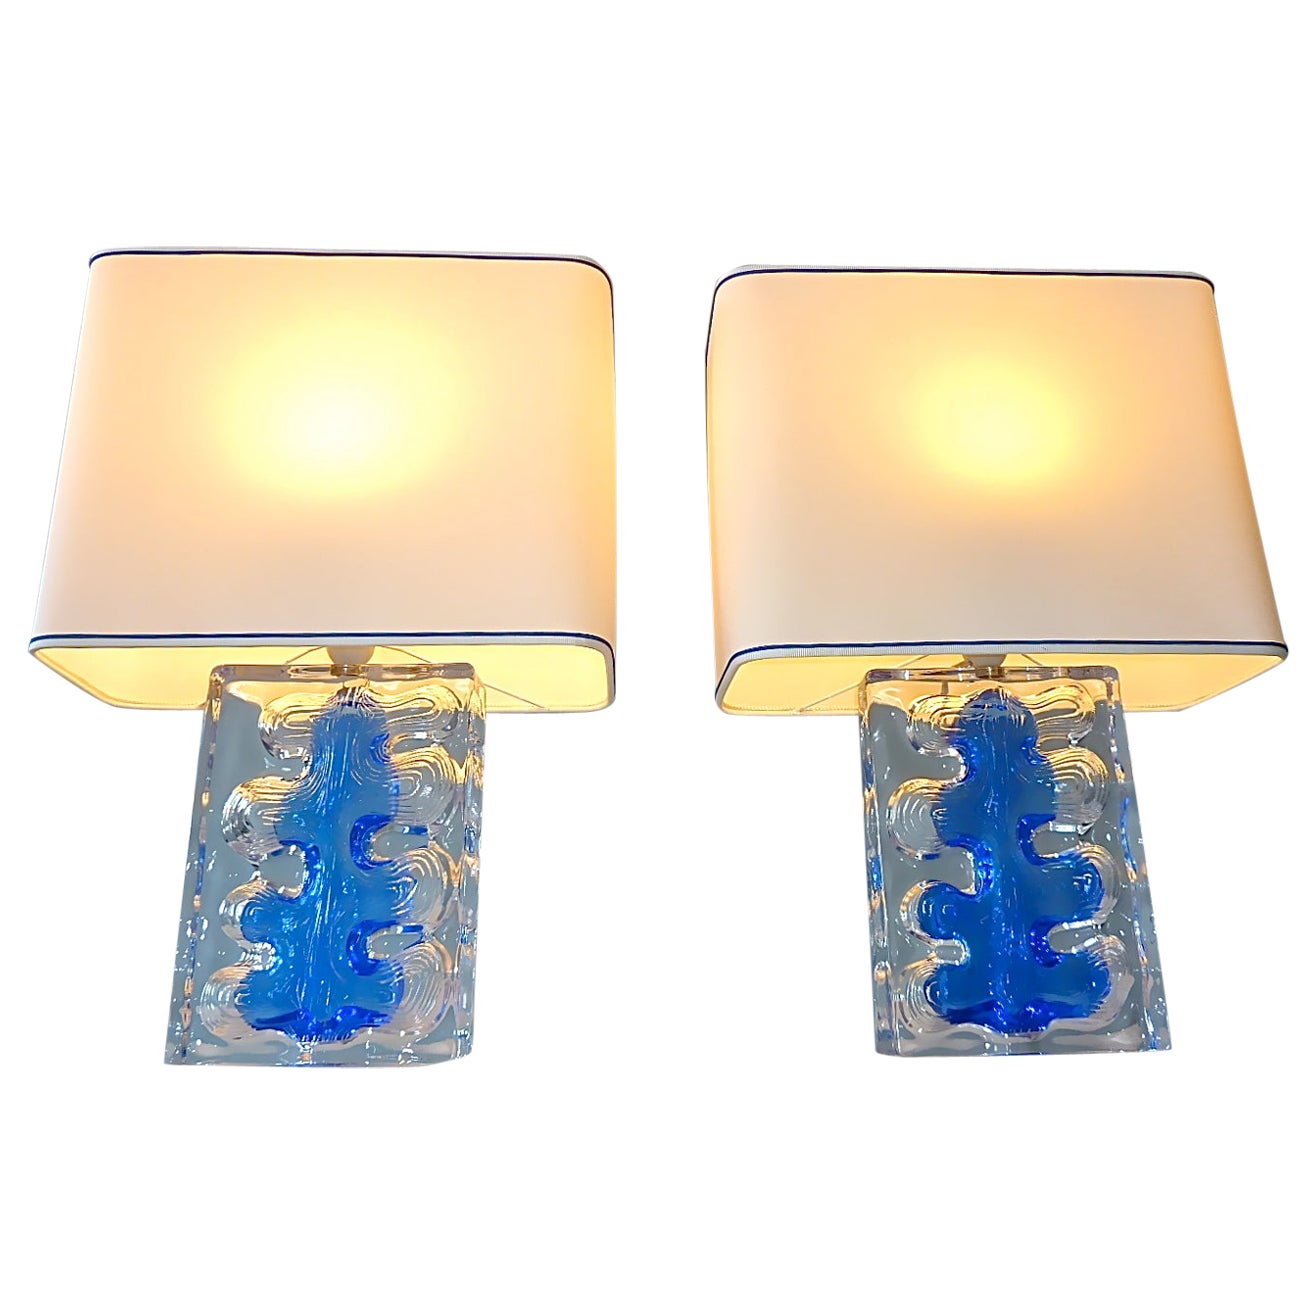 Signed Pair Daum Sculptural Table Lamps Blue Clear Crystal Glass France 1970s For Sale